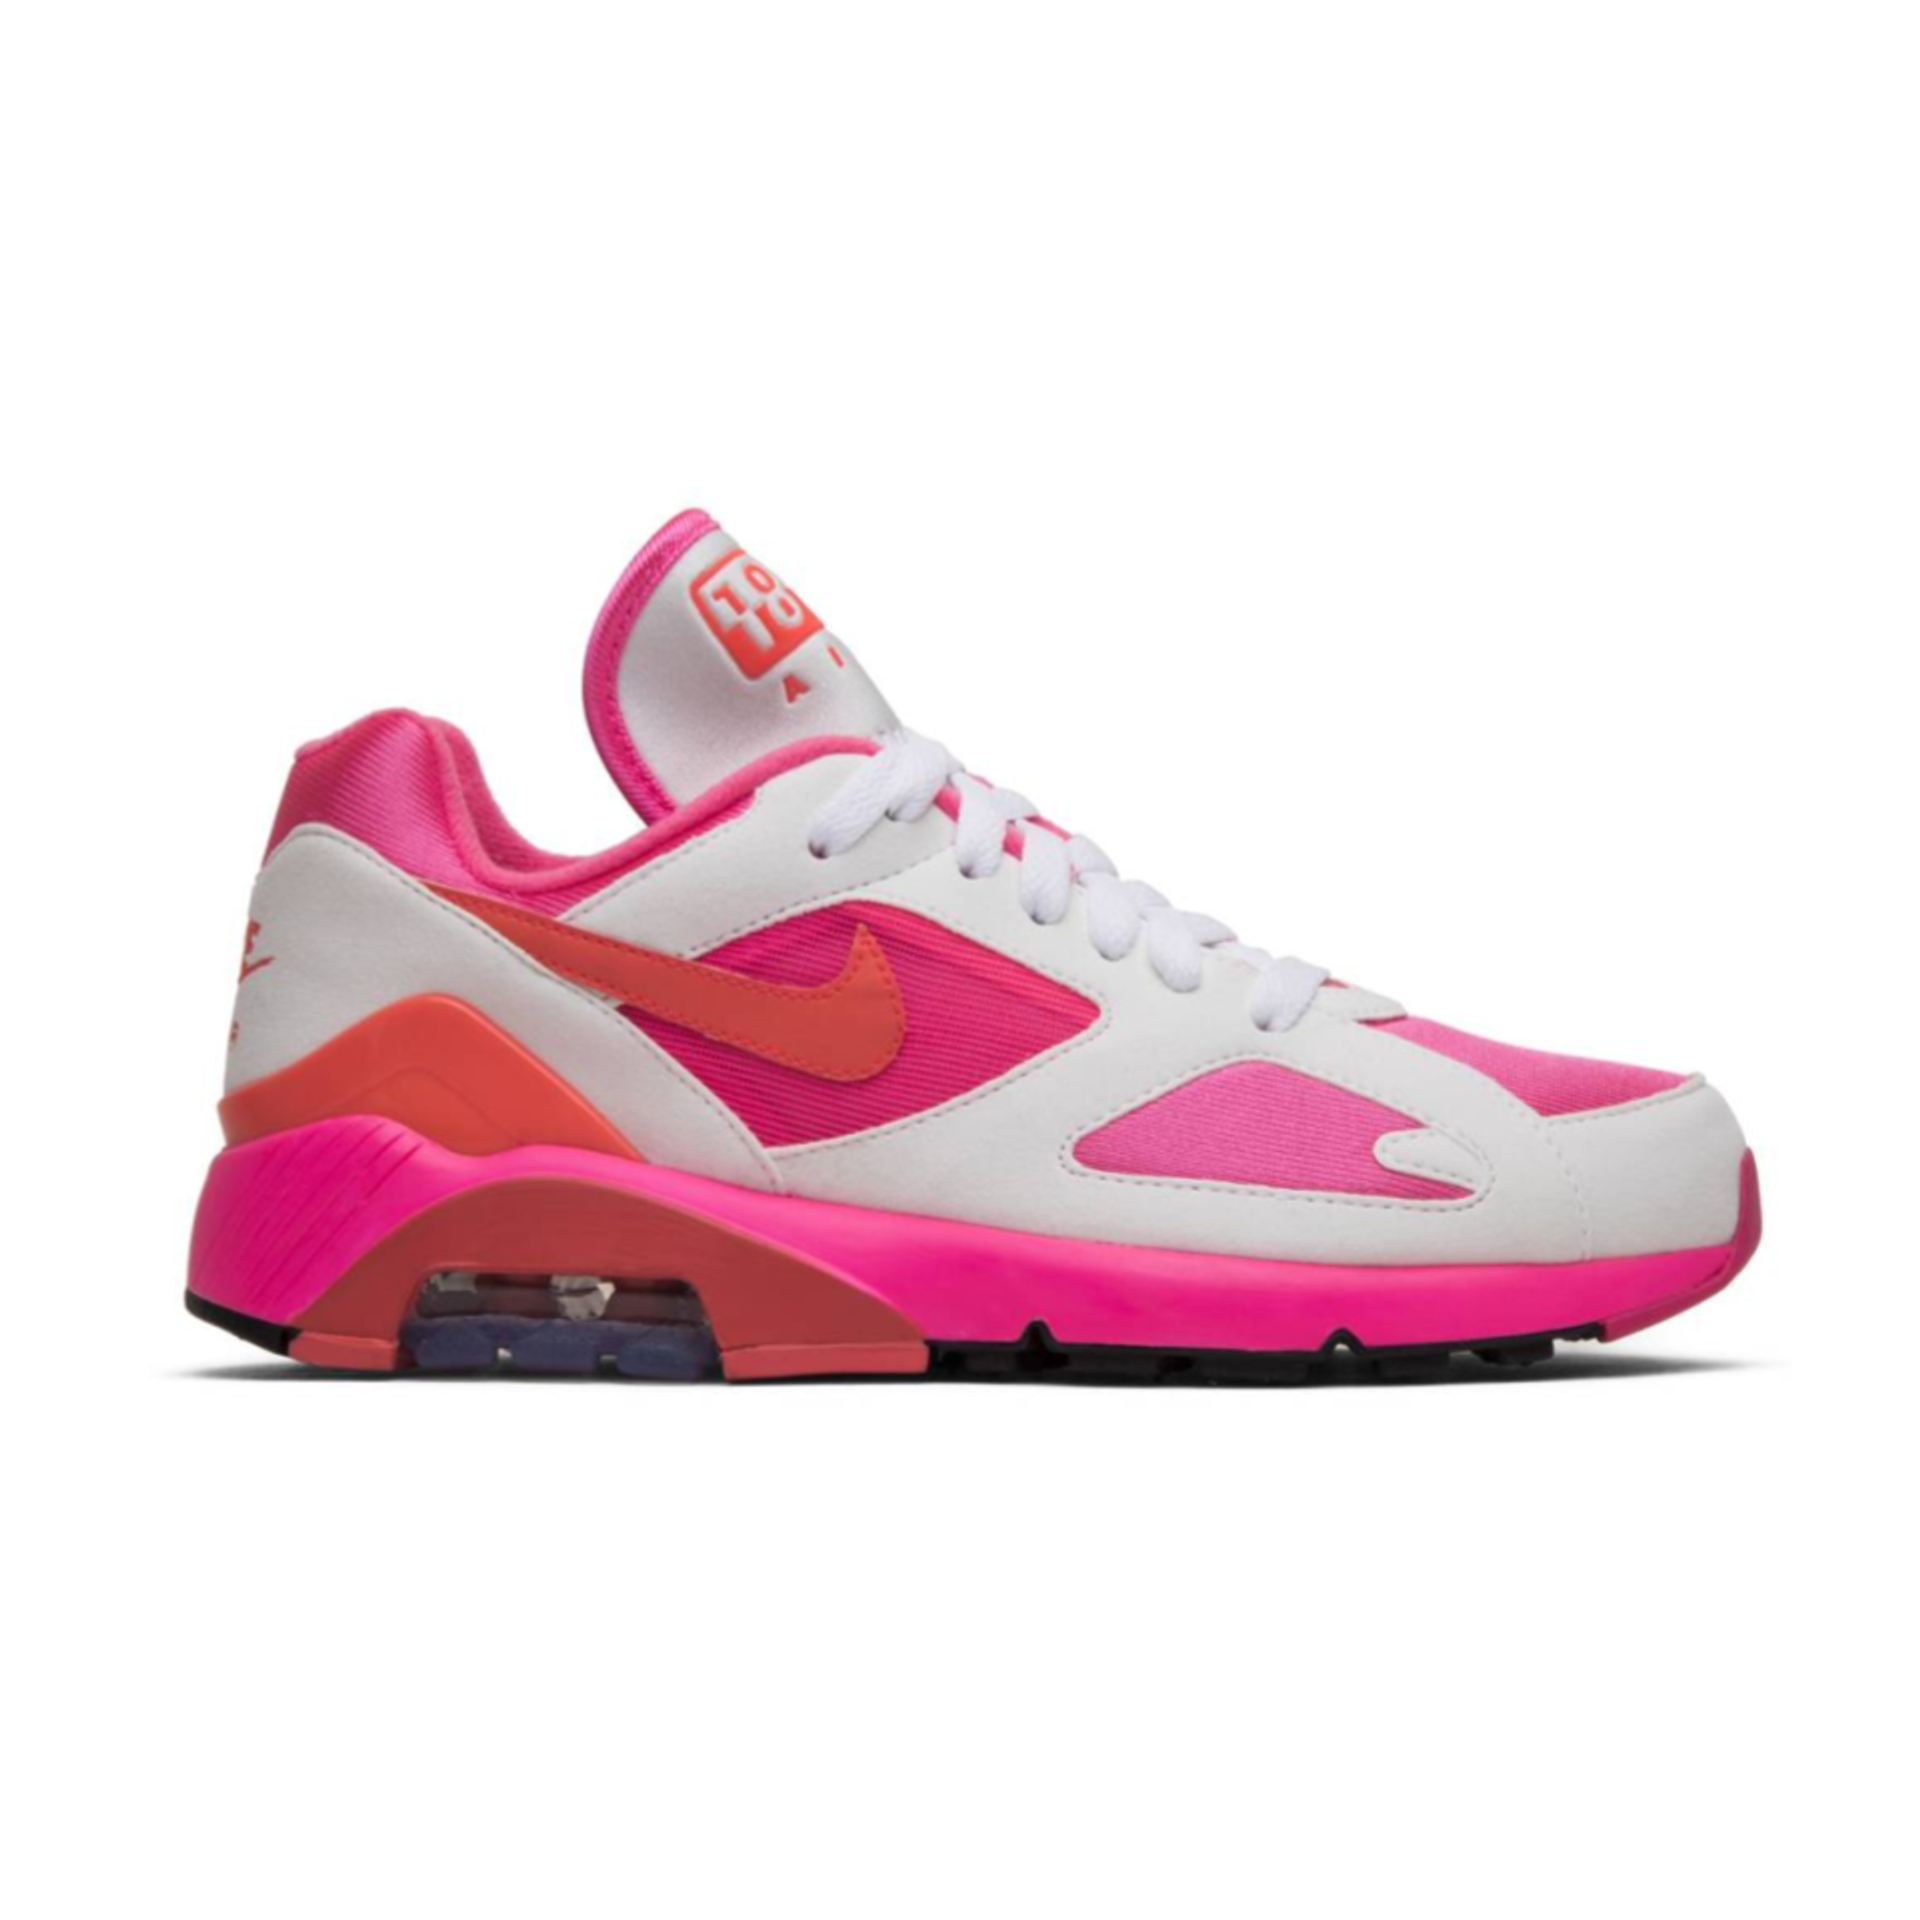 Nike Comme des Garcons x Air Max 180 'White Pink'